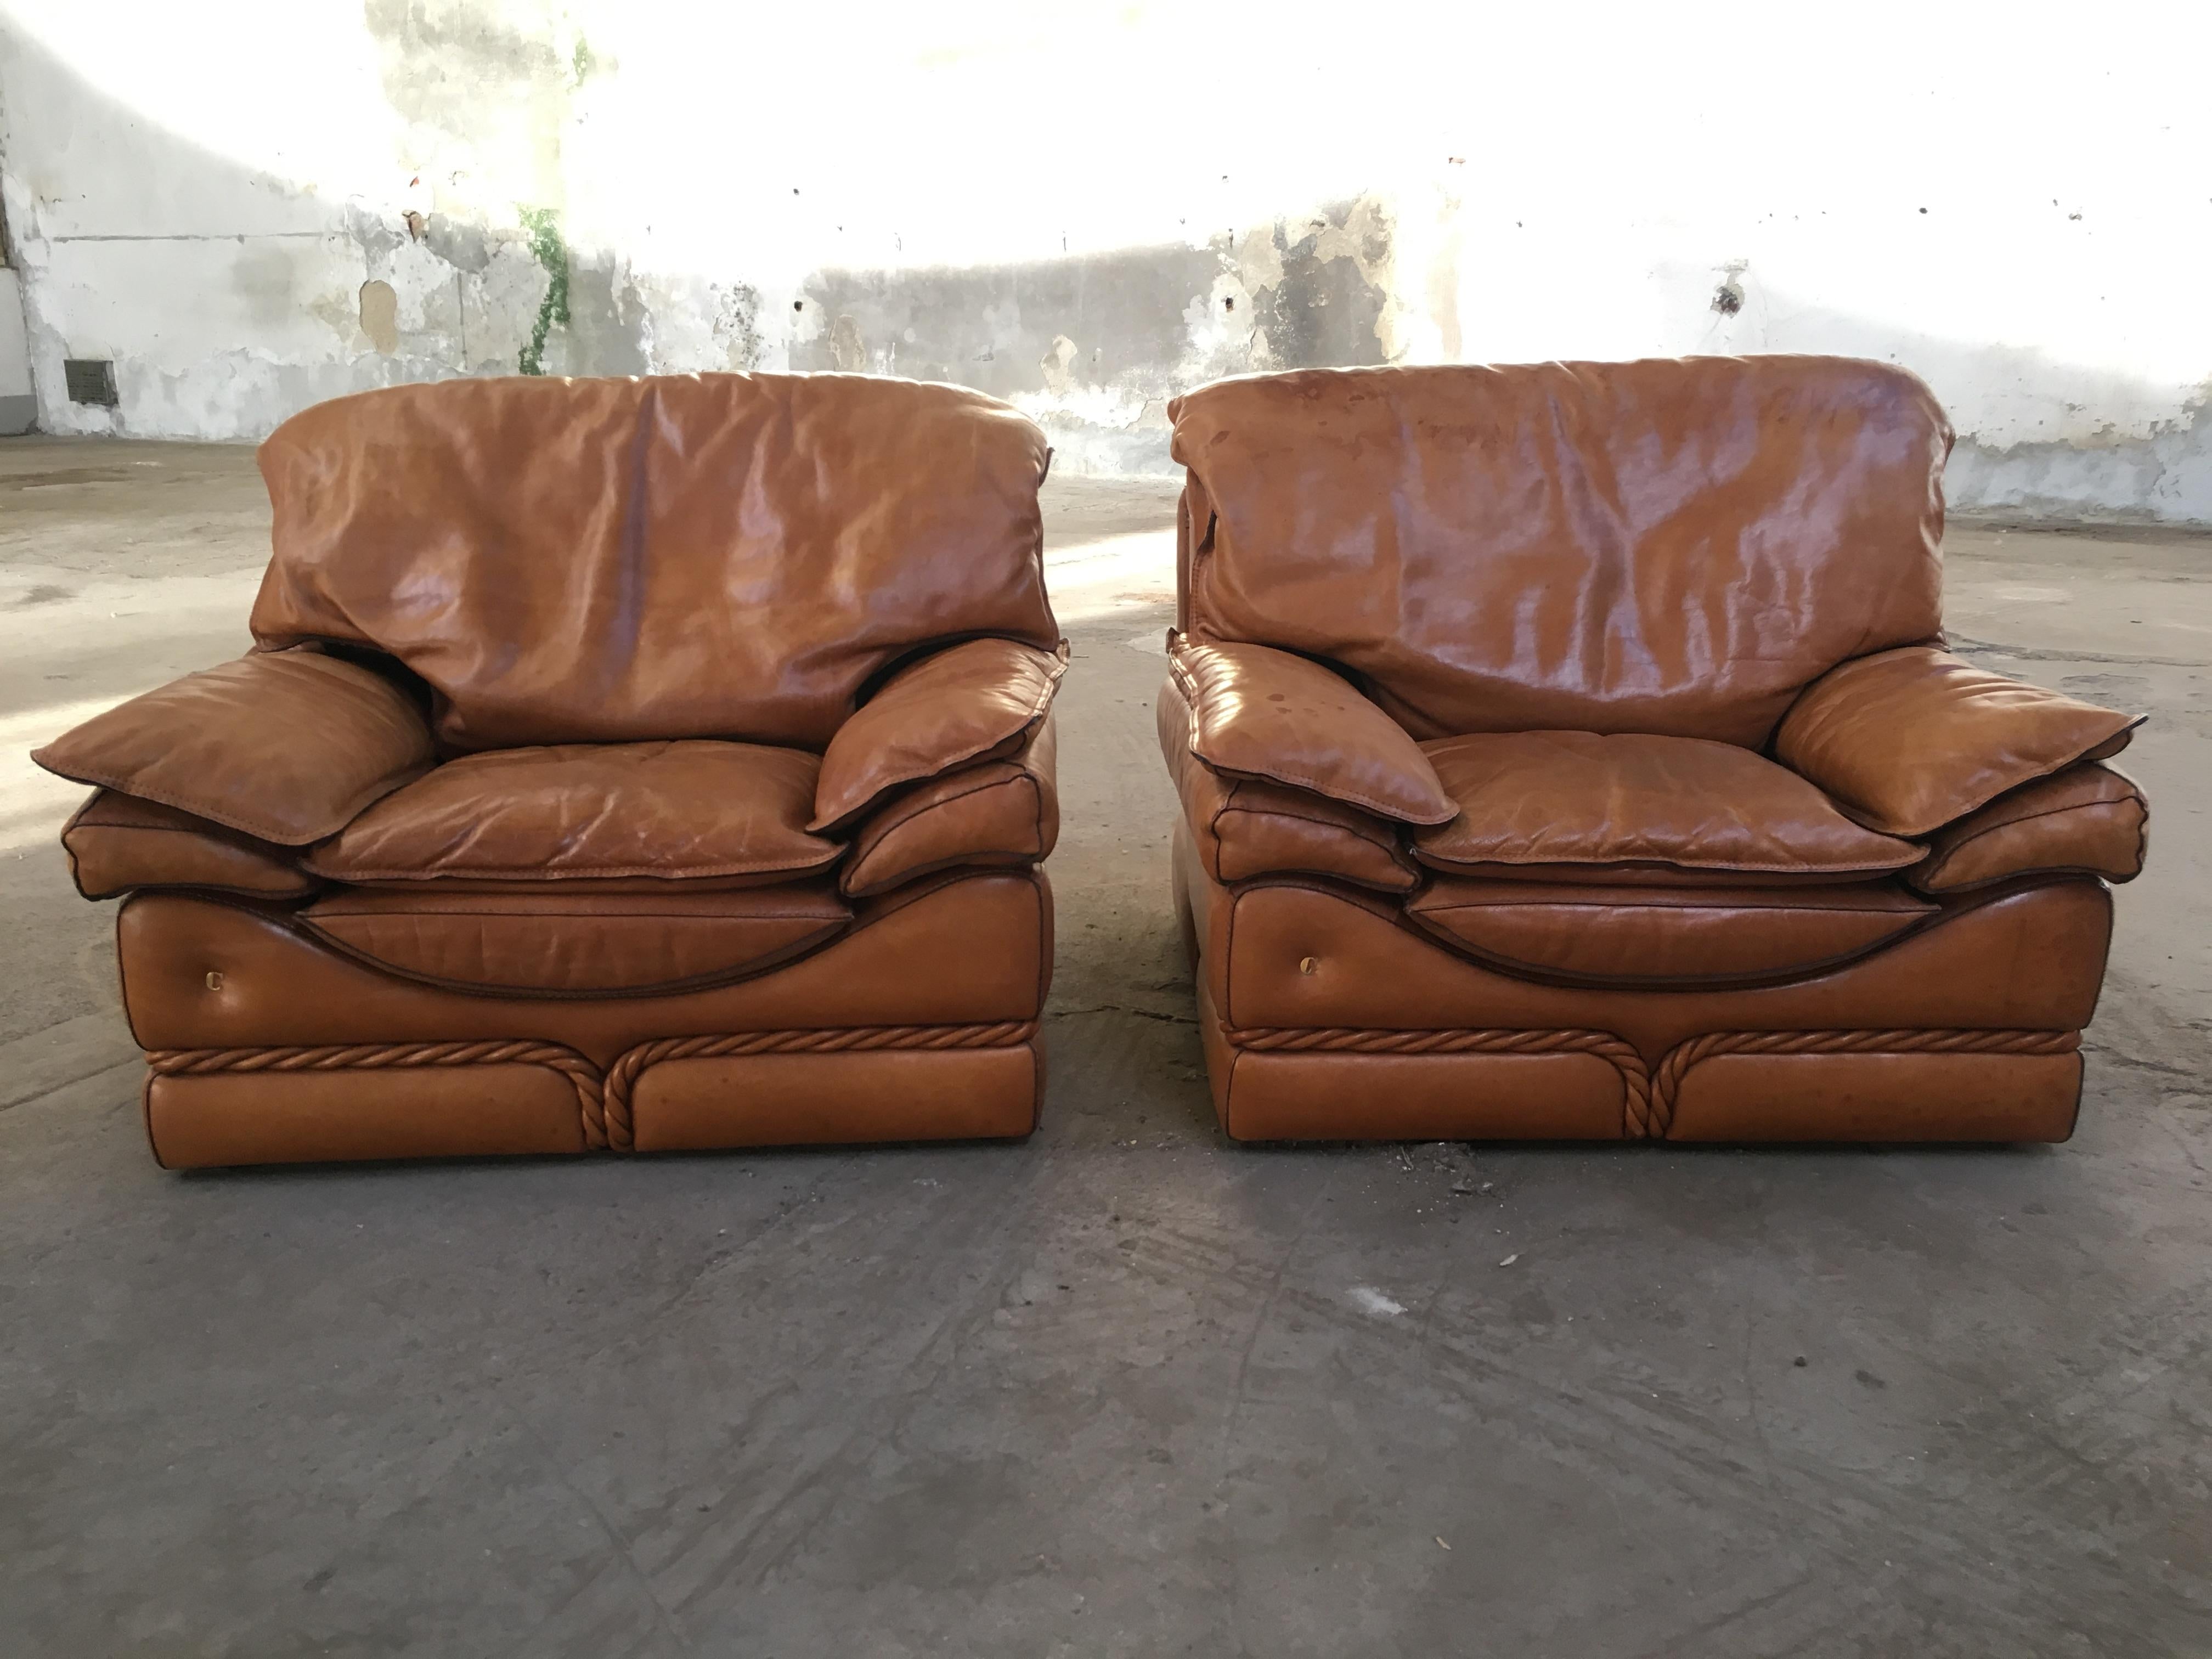 Late 20th Century Mid-Century Modern Italian Pair of Leather Armchairs by Mobilificio Colombo For Sale